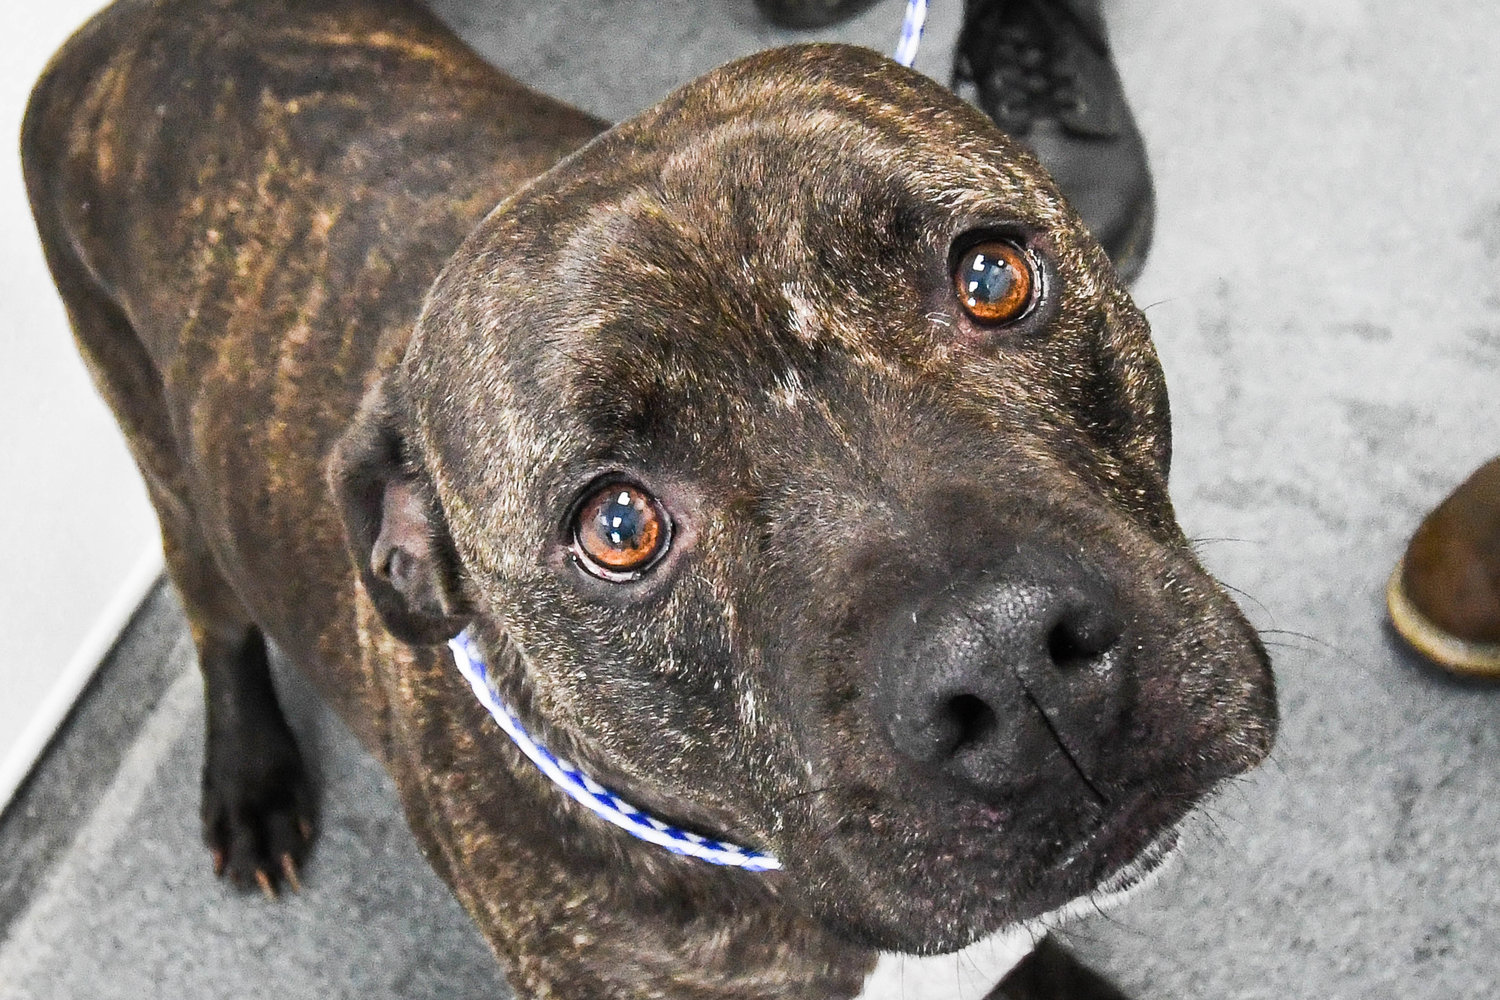 Rebel, a pitbull, is one of many dogs up for adoption at Anita’s Stevens Swan Humane Society in Utica. Those looking to help can make a monetary donation to their local shelter during the Save-A-Life Campaign and every donation is matched.